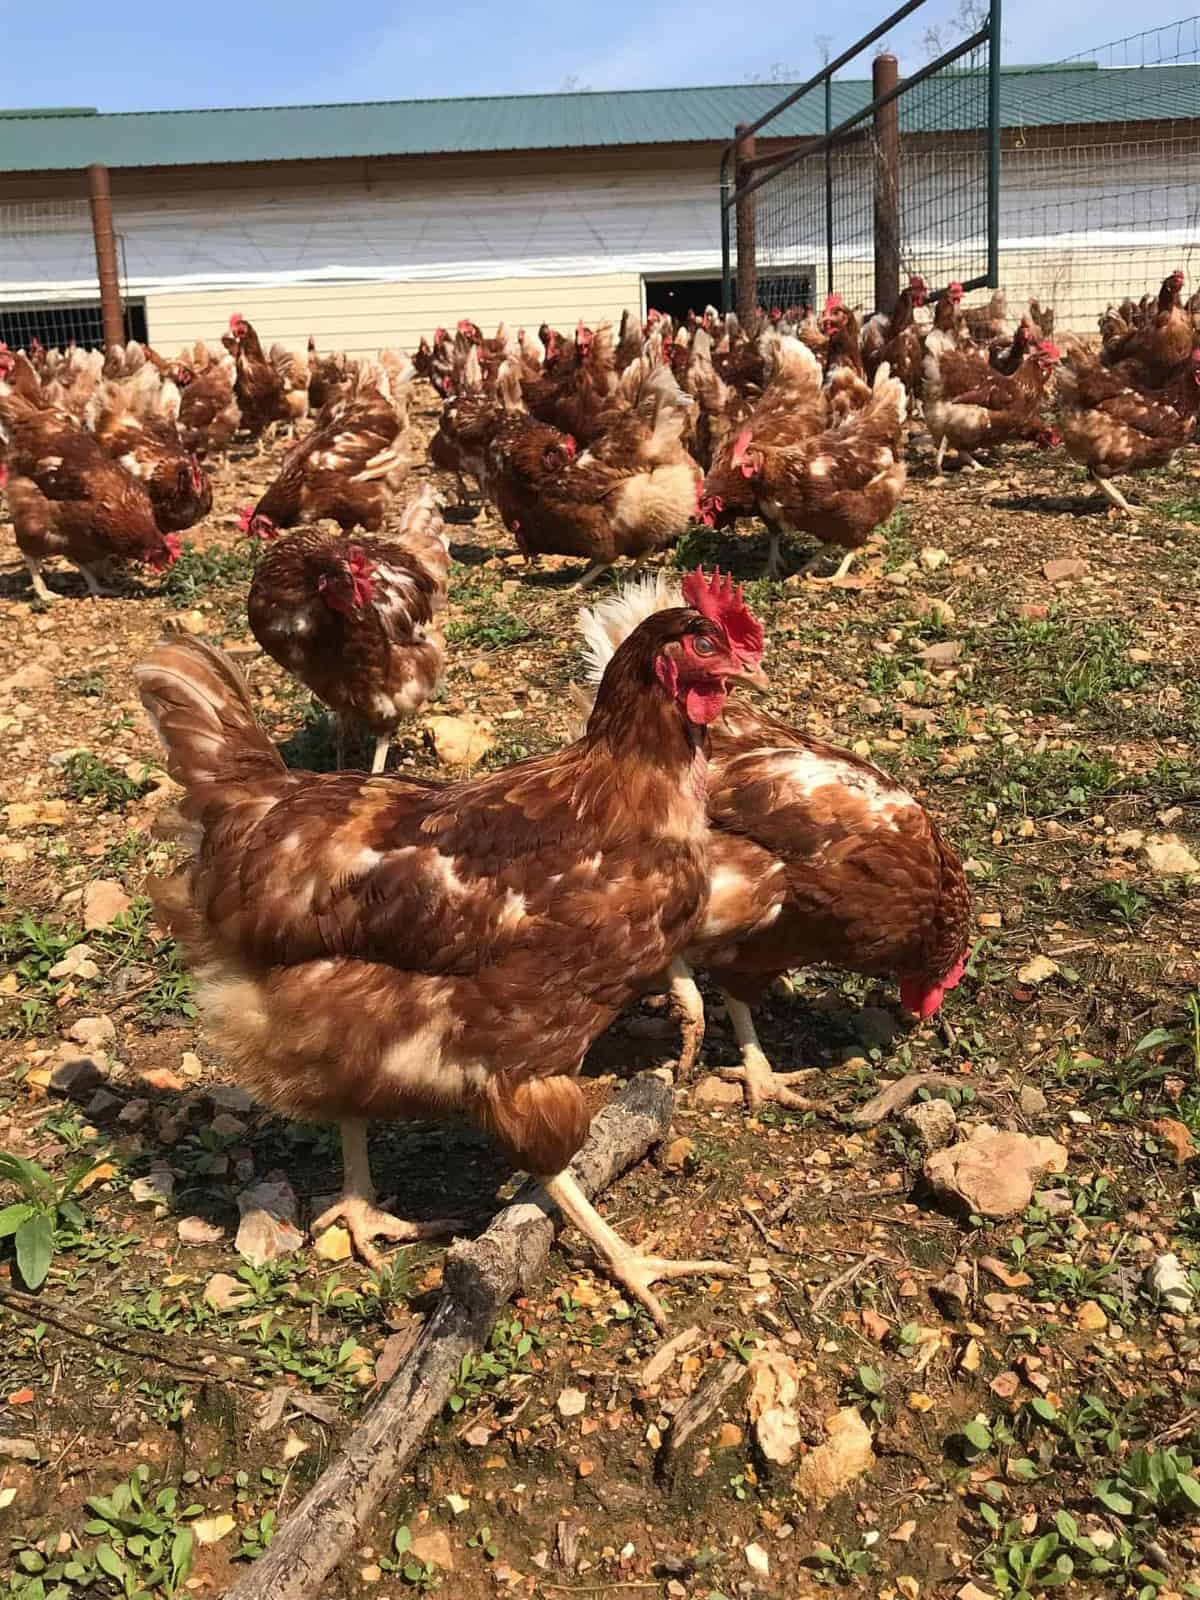 Vital Farms Tour Recap - Sharing how I saw first hand that Vital Farms is the real deal! They are raising happy, healthy hens and treating their employees with respect! | #Foodfaithfitness |